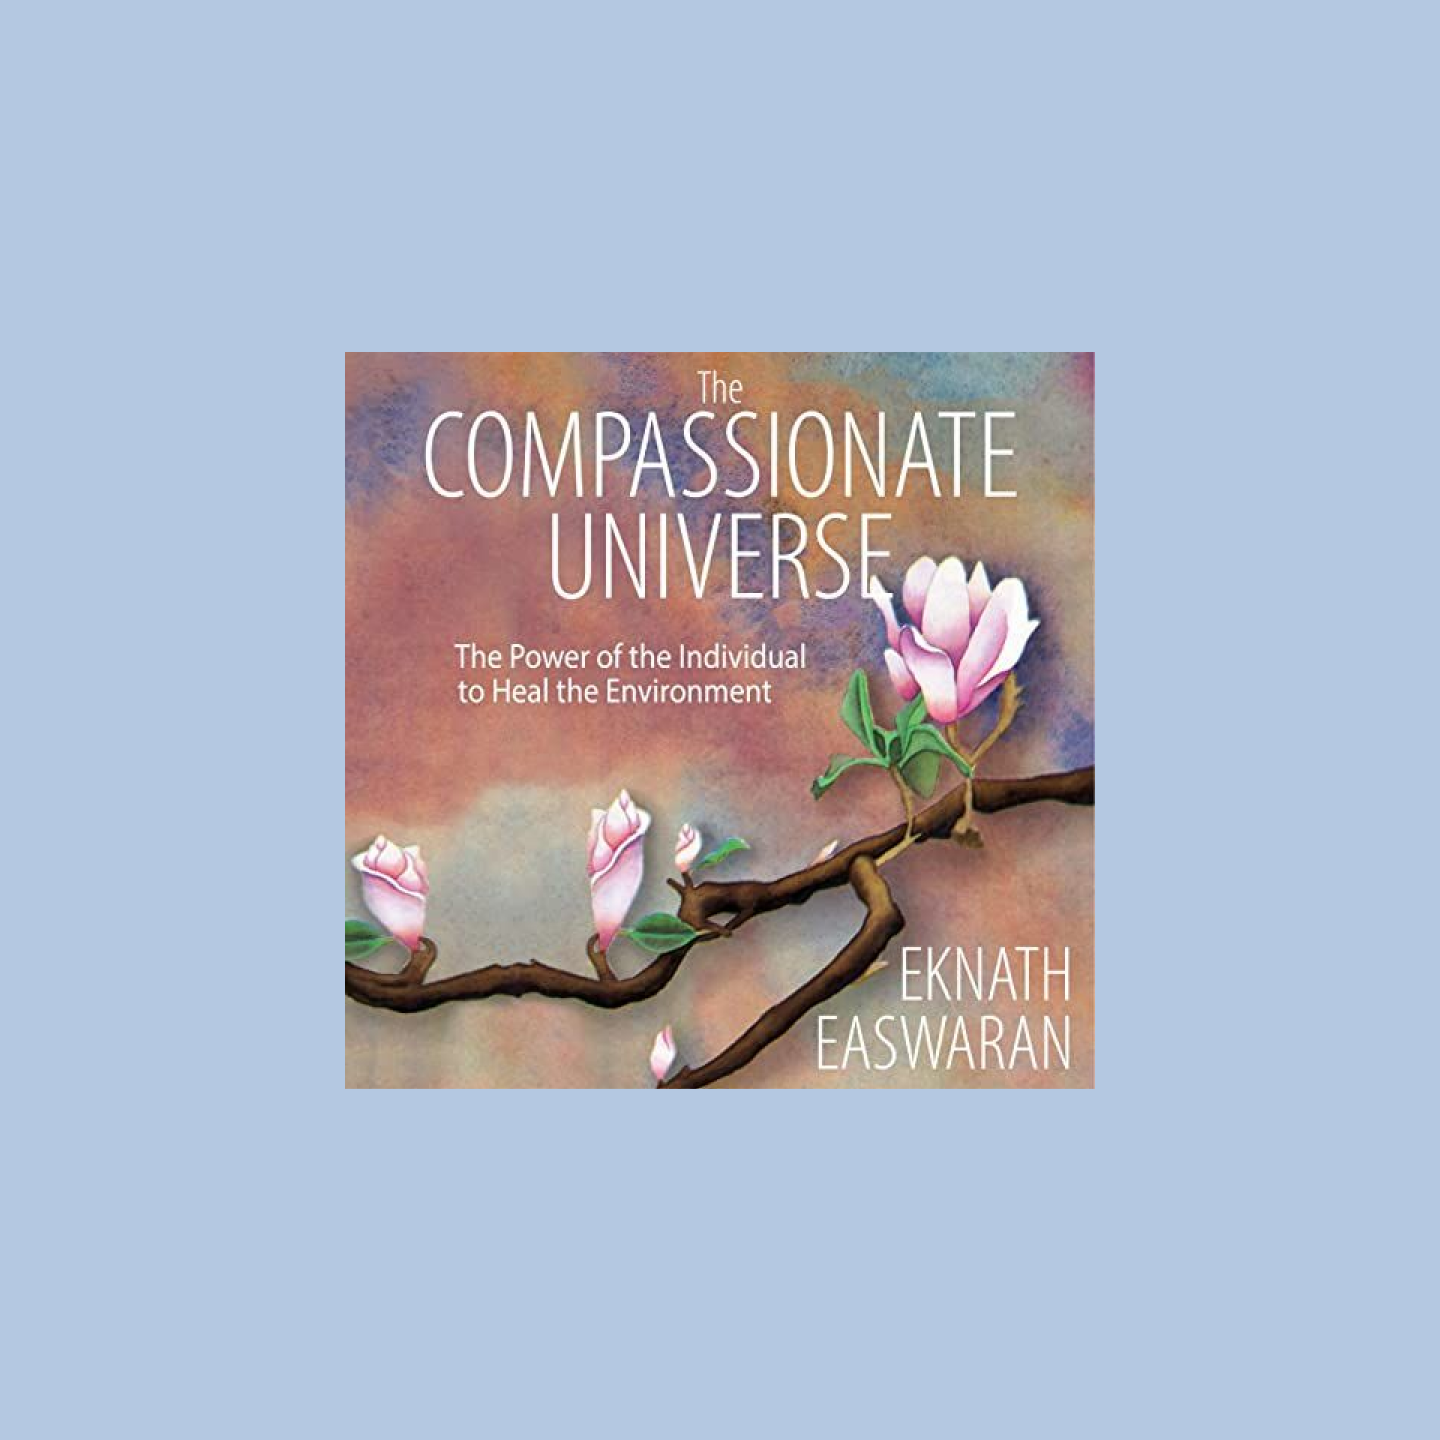 Audiobook cover reads ‘The Compassionate Universe’ with a cherry blossom tree